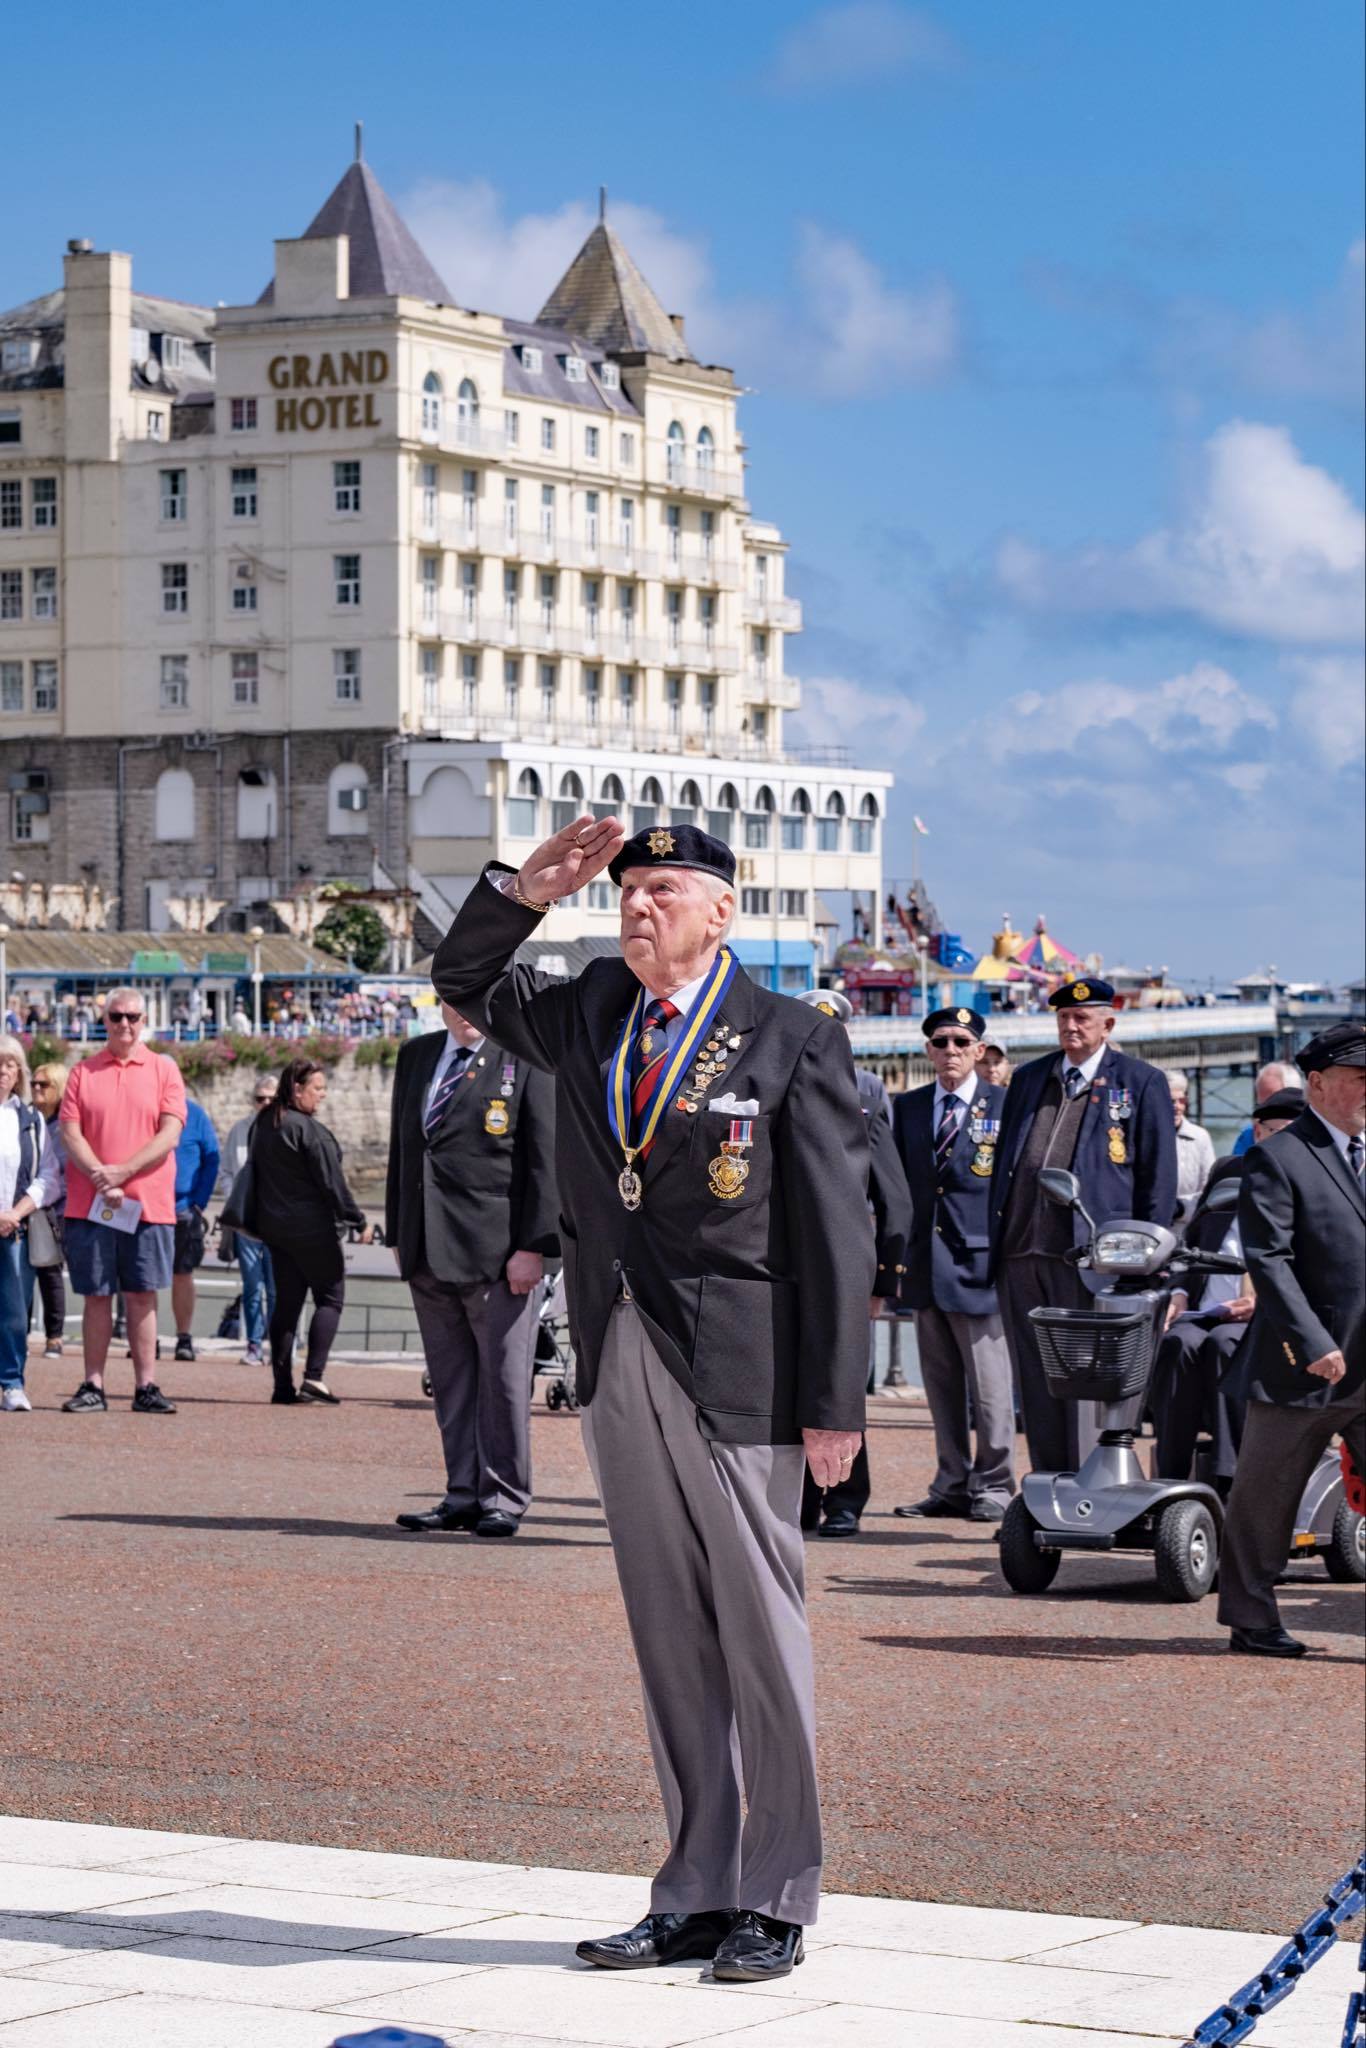 Service at Llandudno War Memorial to commemorate the 80th anniversary of the D-Day landings and the Battle of Normandy. Photo: Jon Harty